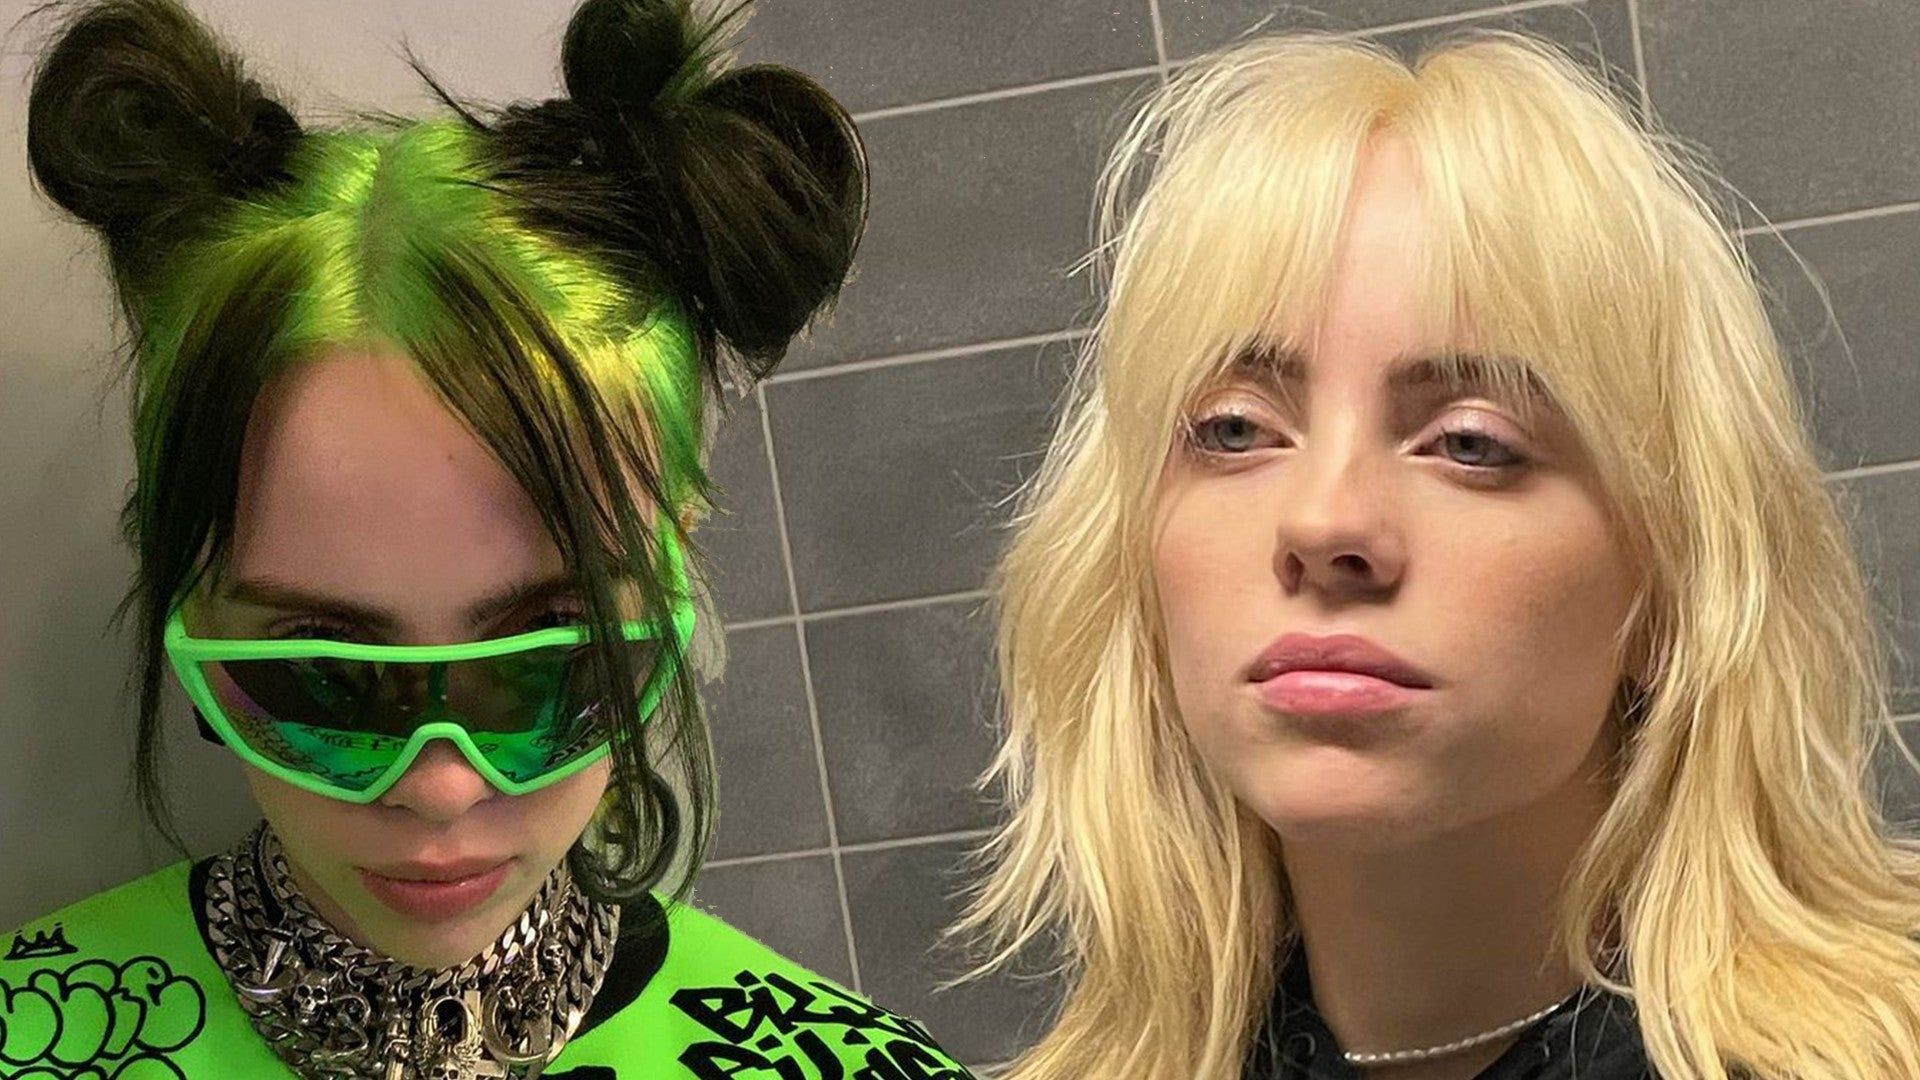 Billie Eilish Ditches Her Neon Green Hair for Classic Blonde - See Her New Look!